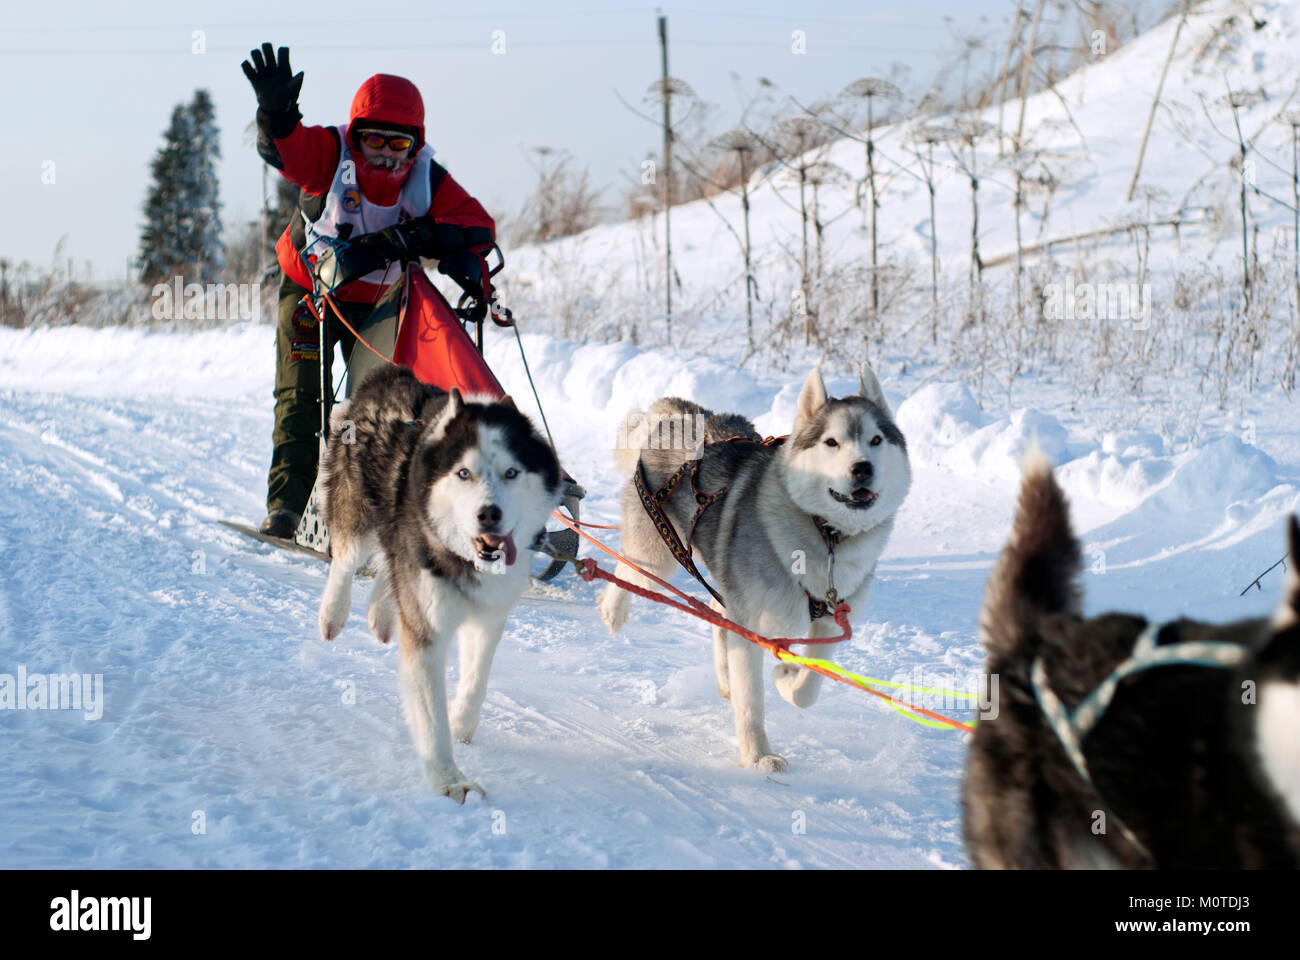 POLAZNA, RUSSIA - JANUARY 21, 2018: the sportsman controls sledges harnessed by Siberian huskies, during the dog sled race in the Perm region Stock Photo